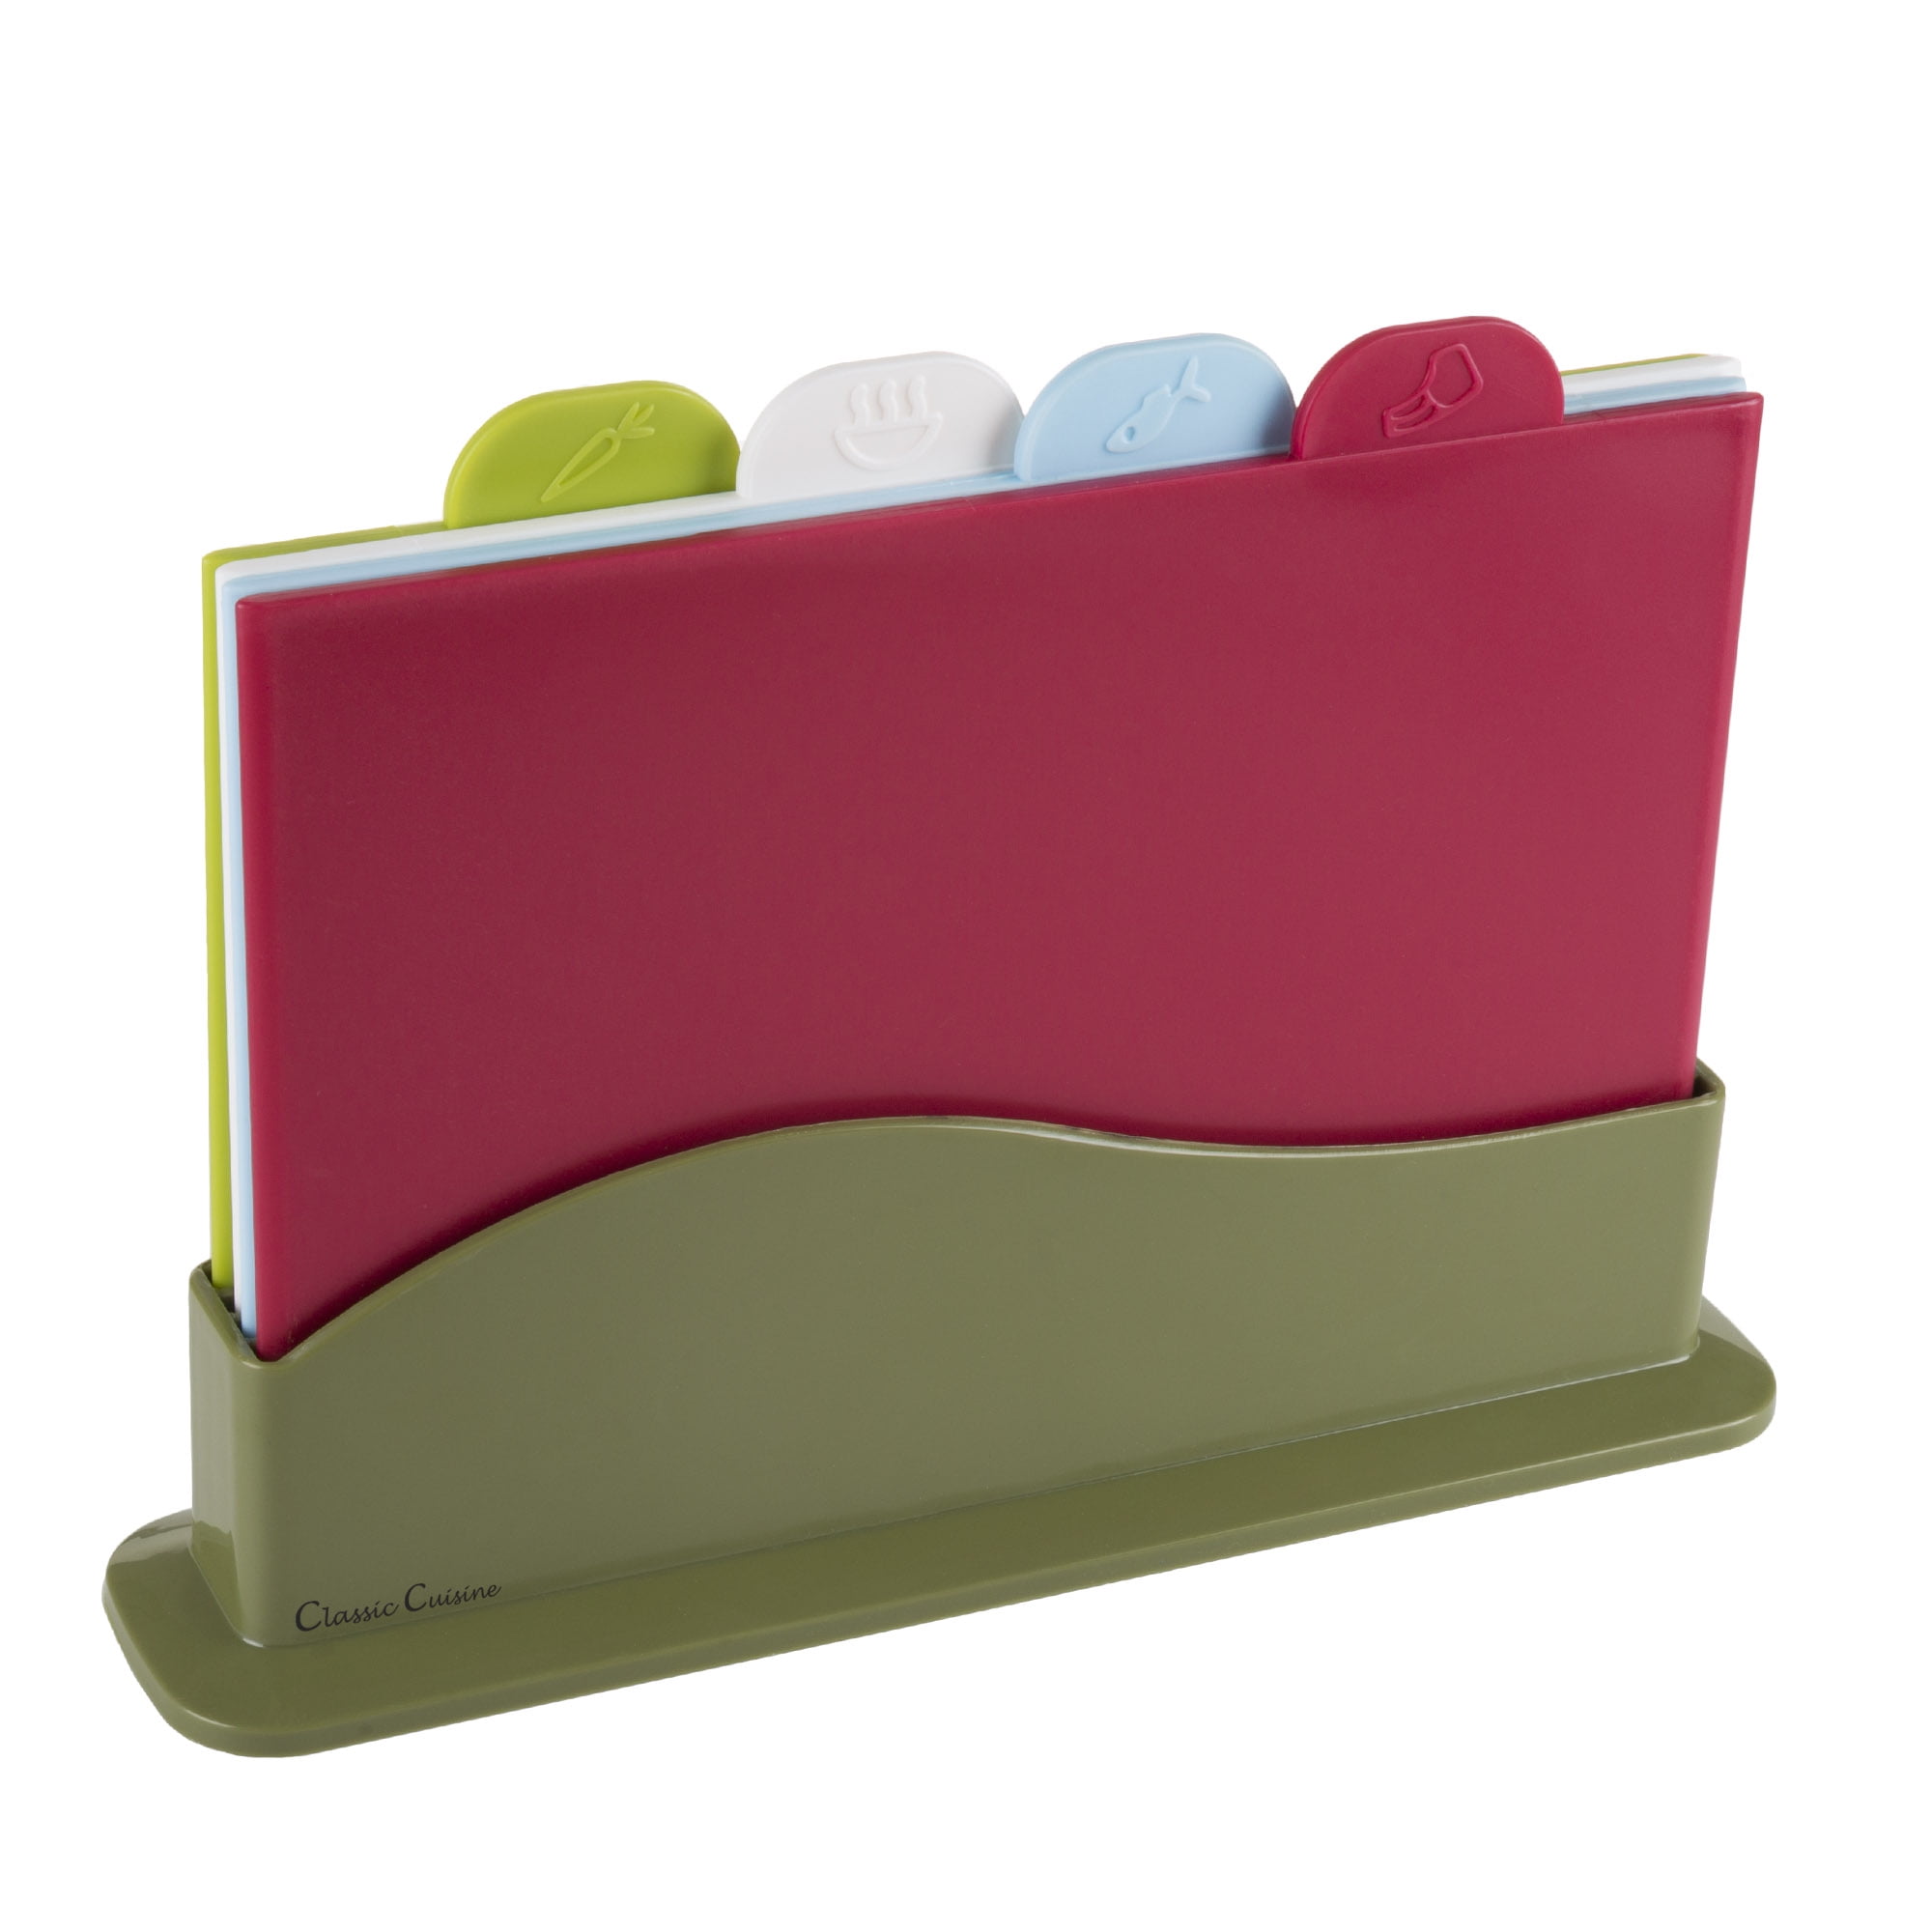  Color-Coded Plastic Cutting Board Set with Storage Stand - 4  Piece Set for Various Food Types - Slip-Resistant Design - Dishwasher Safe:  Home & Kitchen